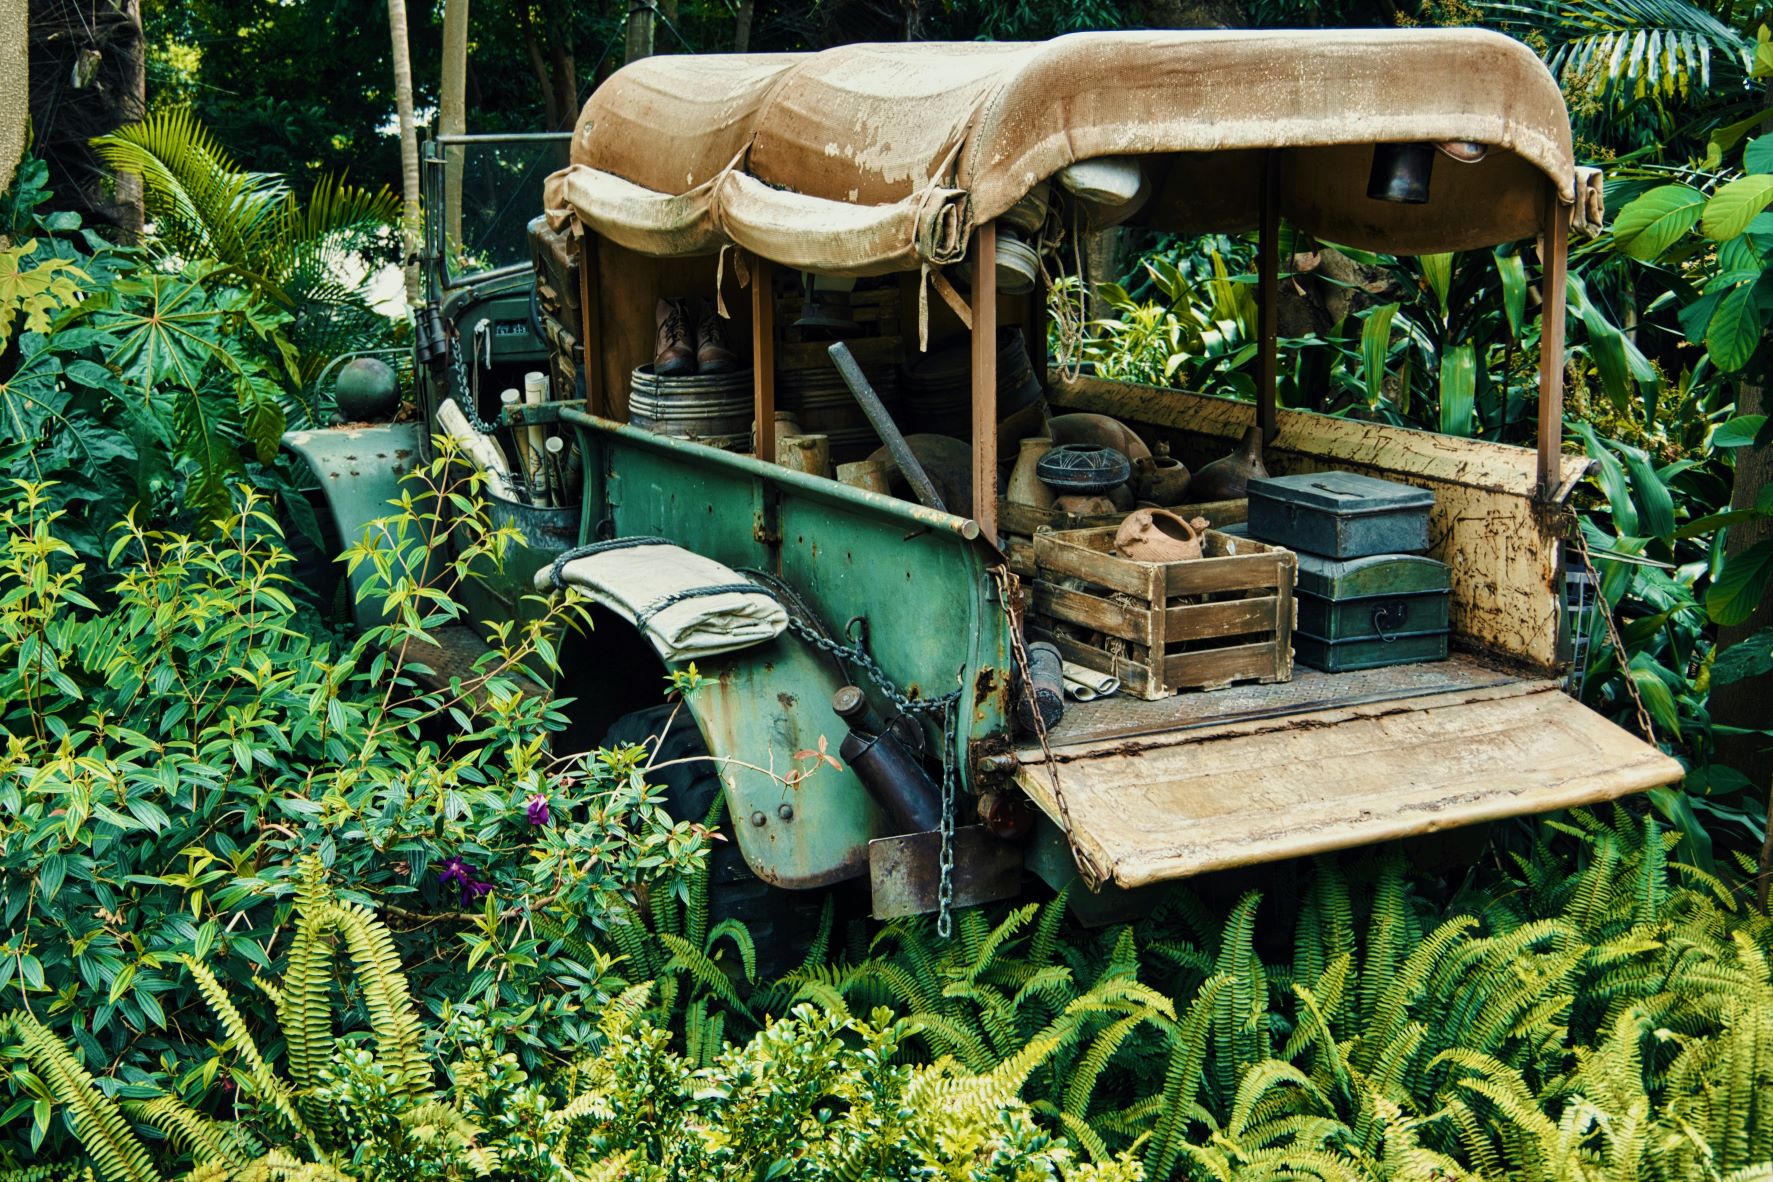 Old Vehicle with Supplies in Jungle